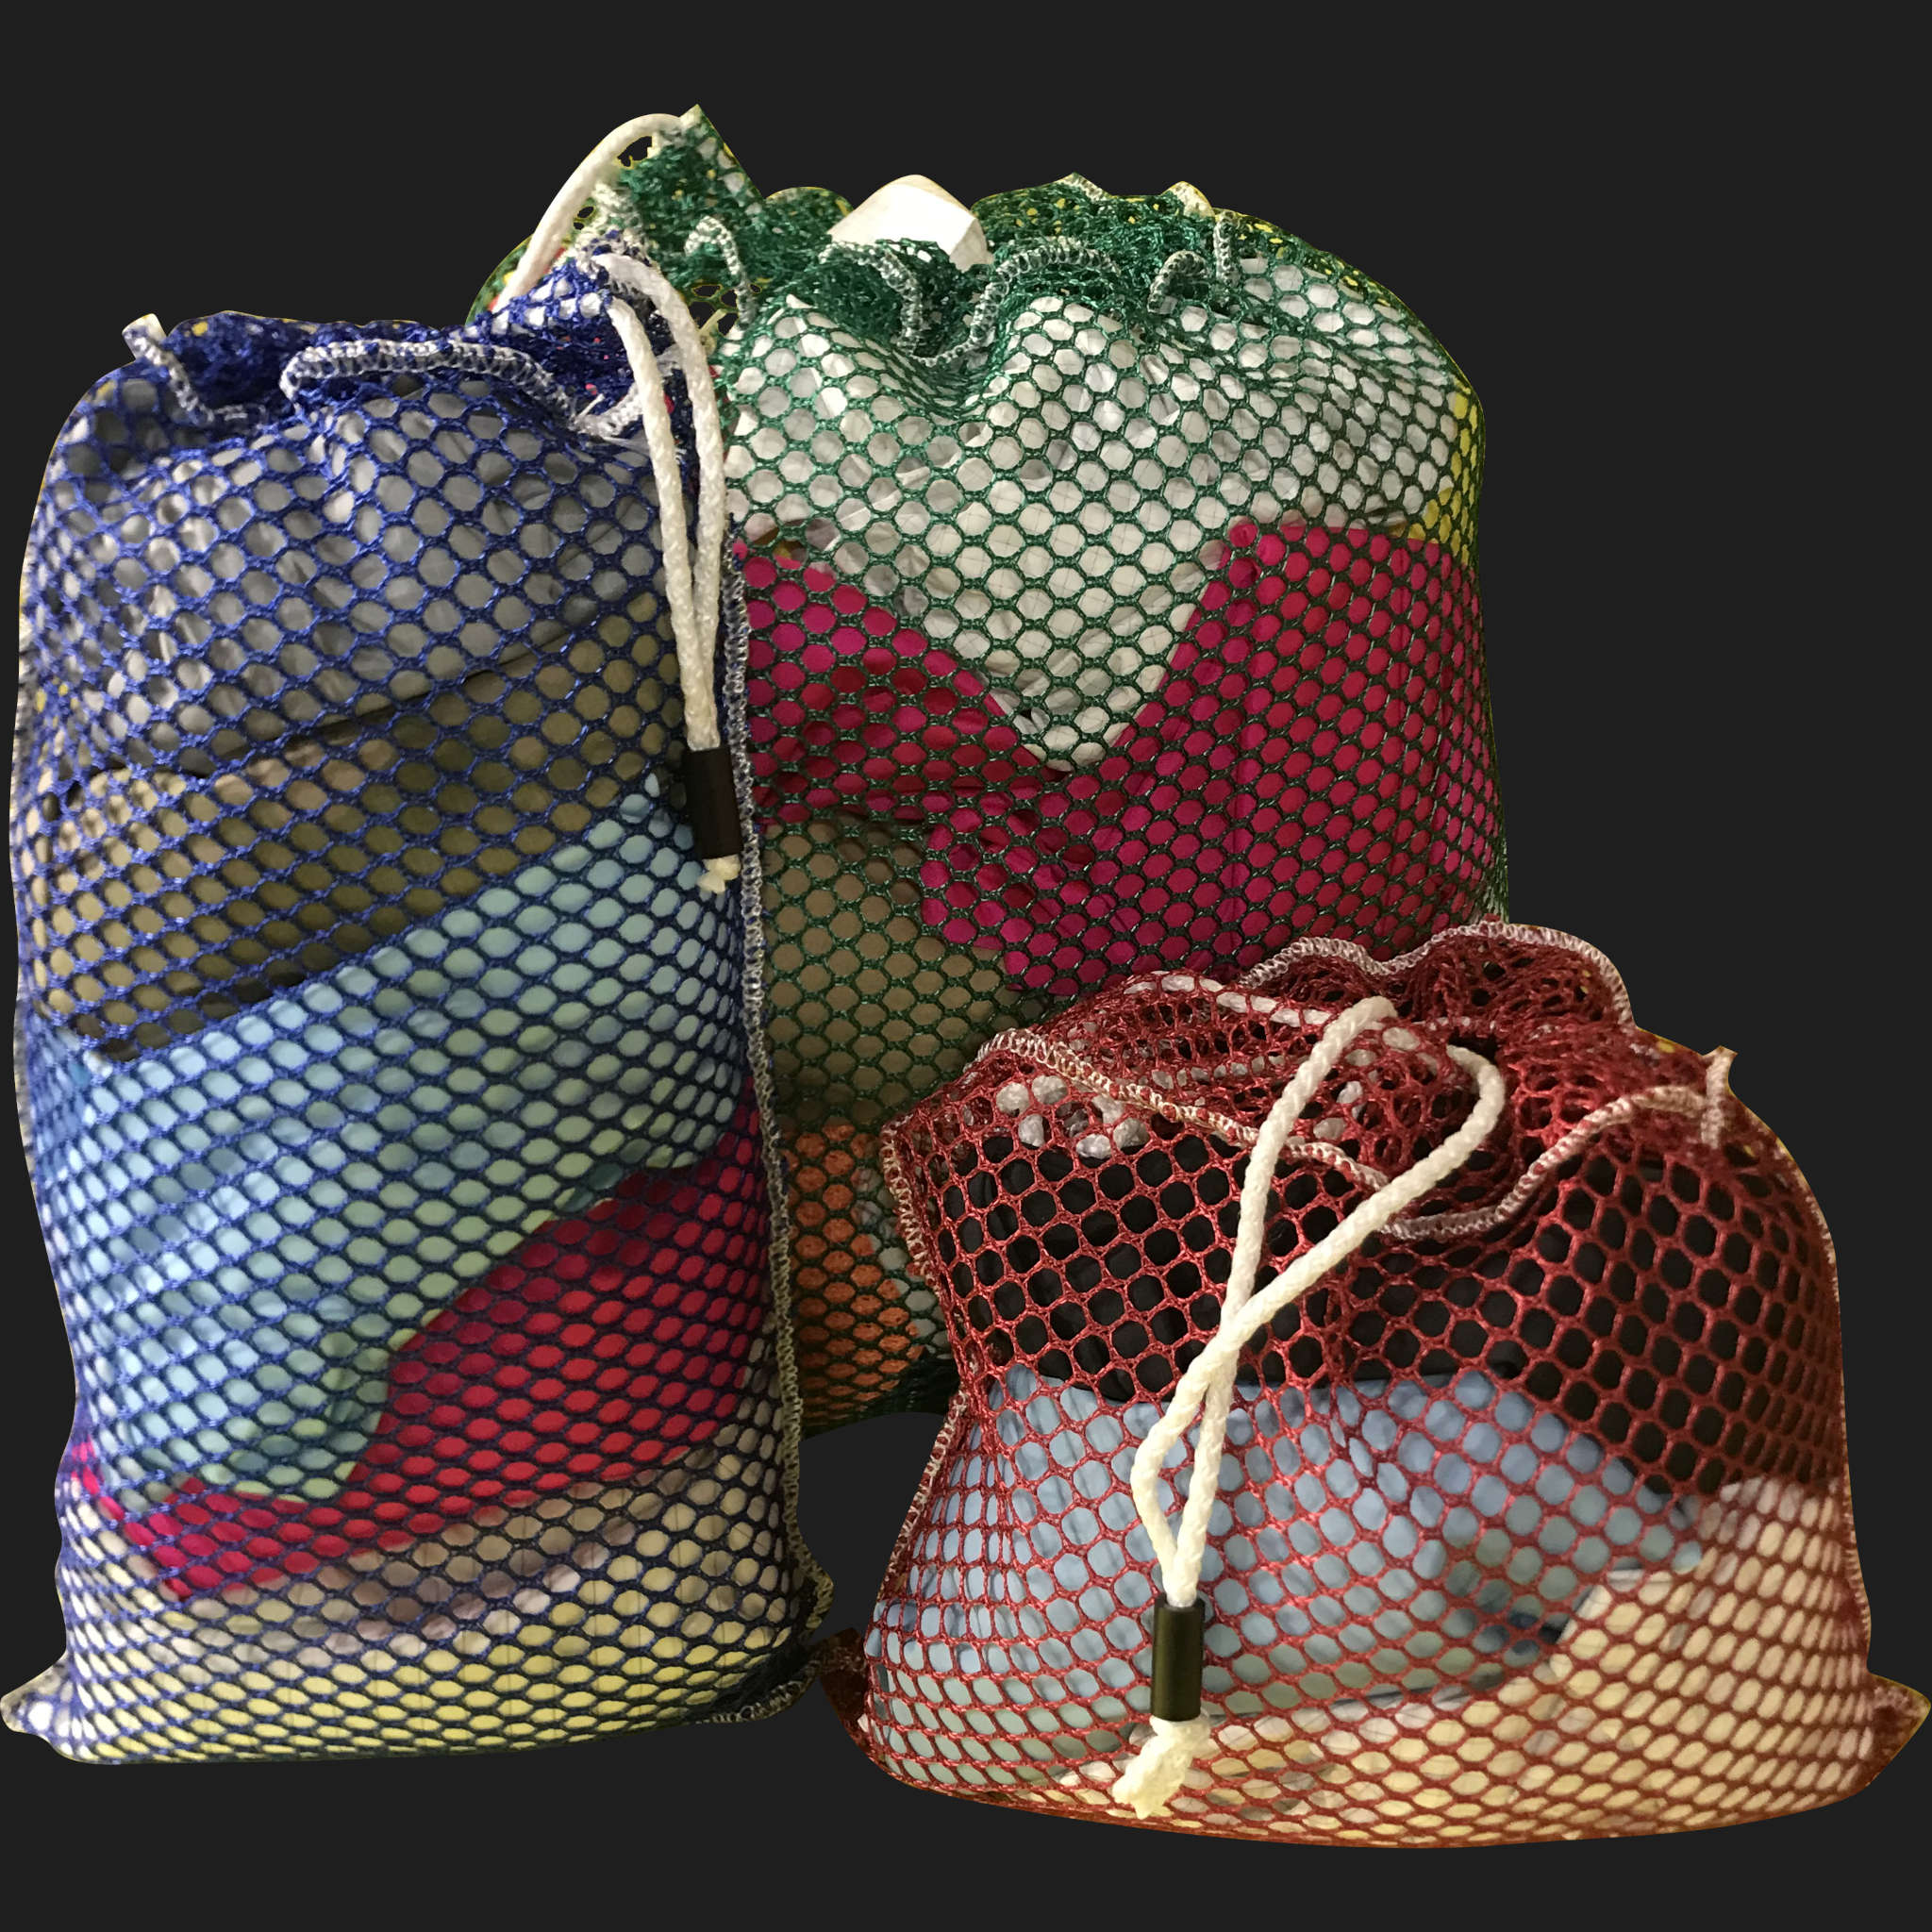 56" x 76" Customized Mesh-Net-Laundry Bags Heavy Duty with Cord and barrellock closure